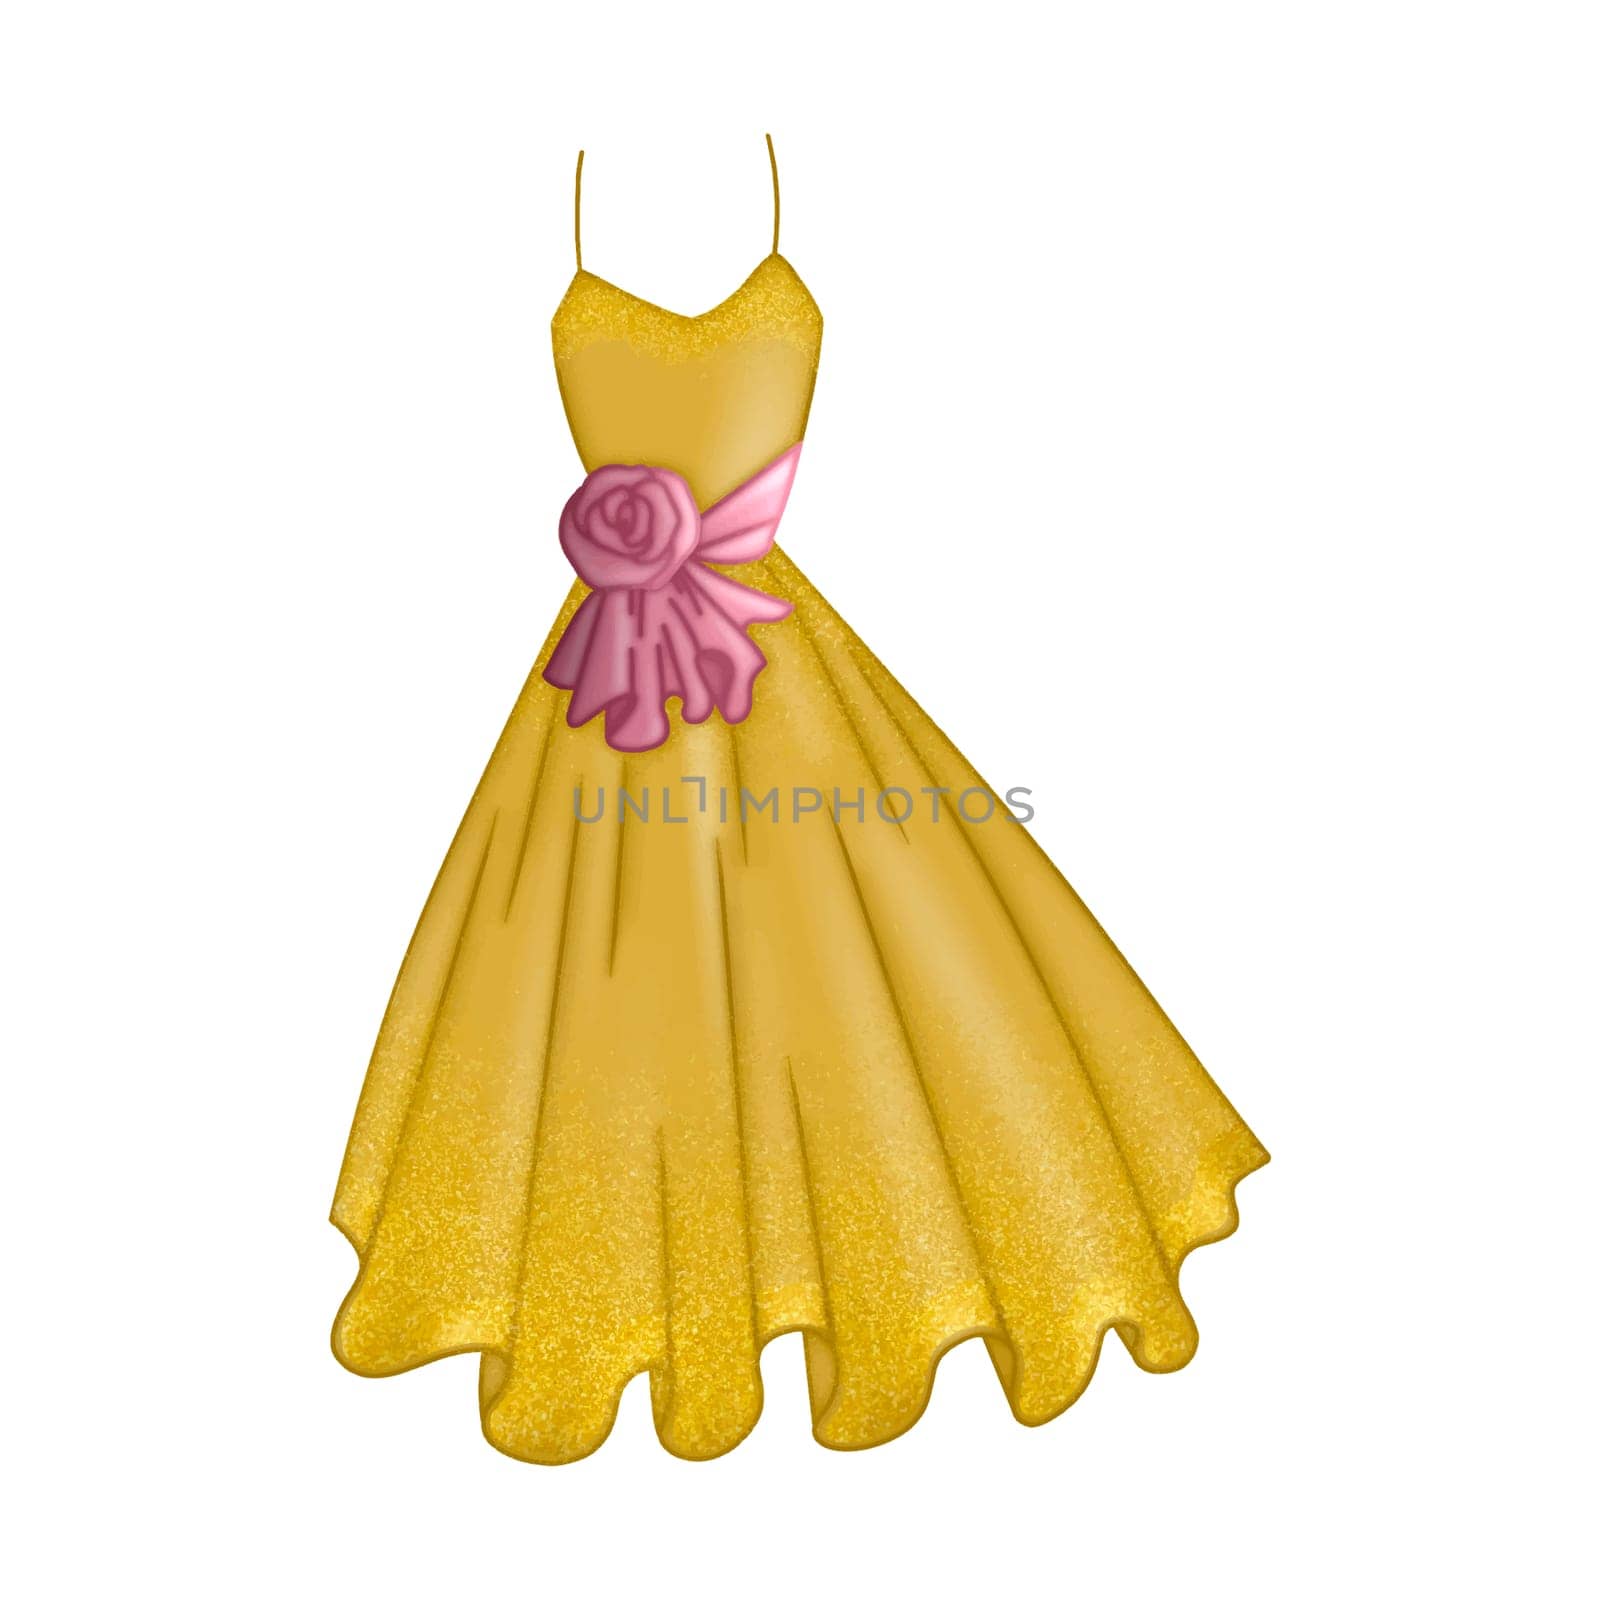 Gold Glitter Party Dress with Pink Ribbon Party illustration isolated Clipart  by Skyecreativestudio